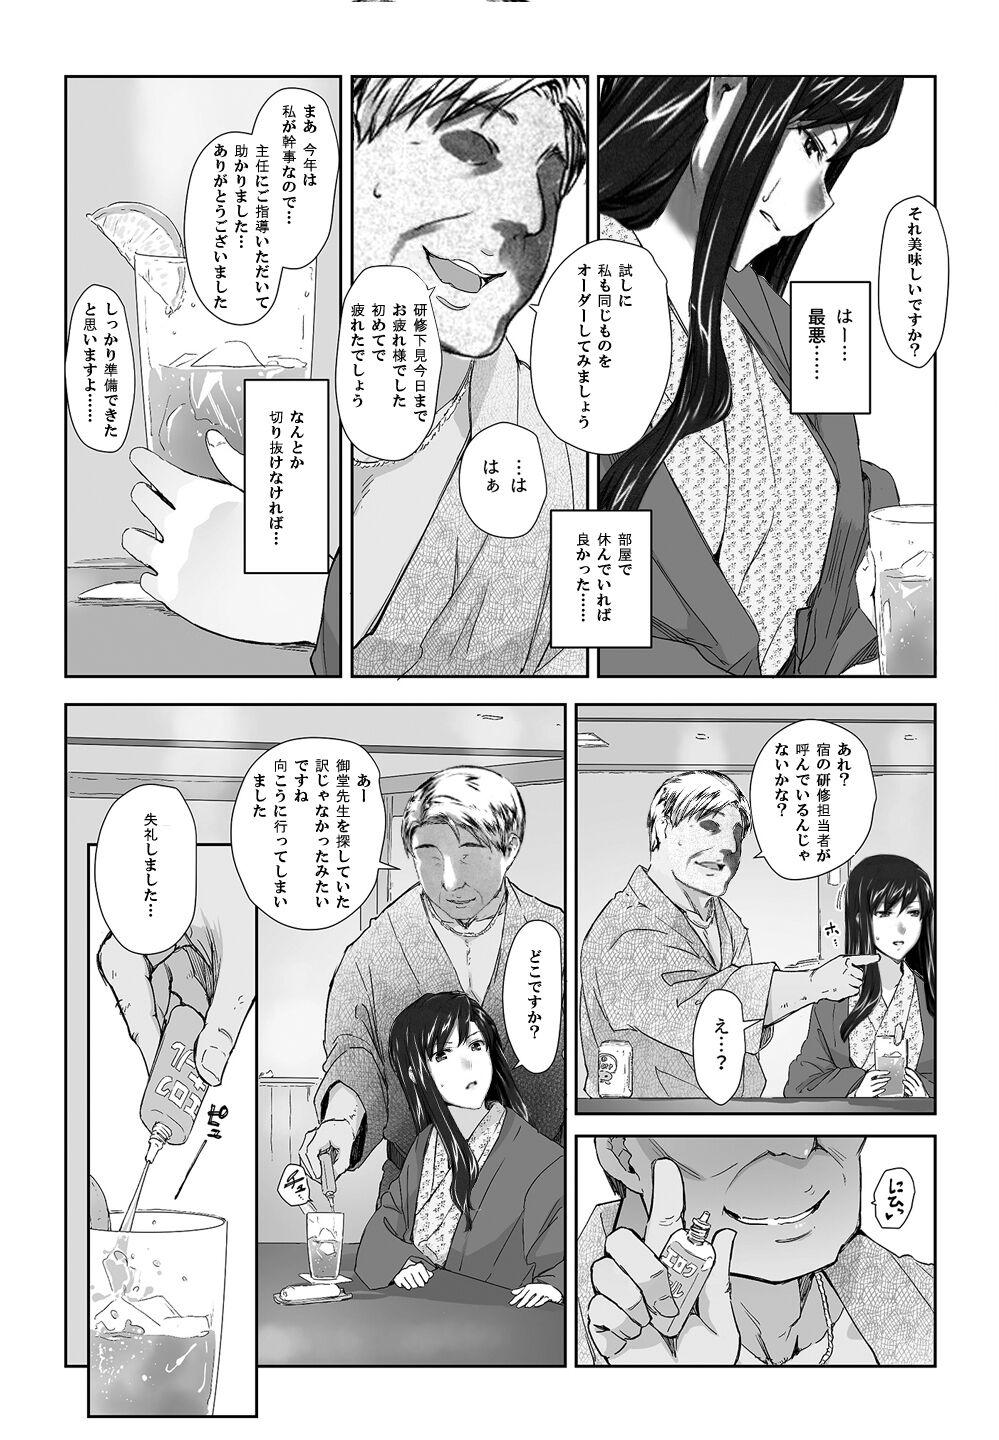 Ballbusting Sakiko-san in delusion Vol.8 ~Sakiko-san's circumstance at an educational training Route3~ (collage) (Continue to “First day of study trip” (page 42) of Vol.1) - Original Suruba - Page 4